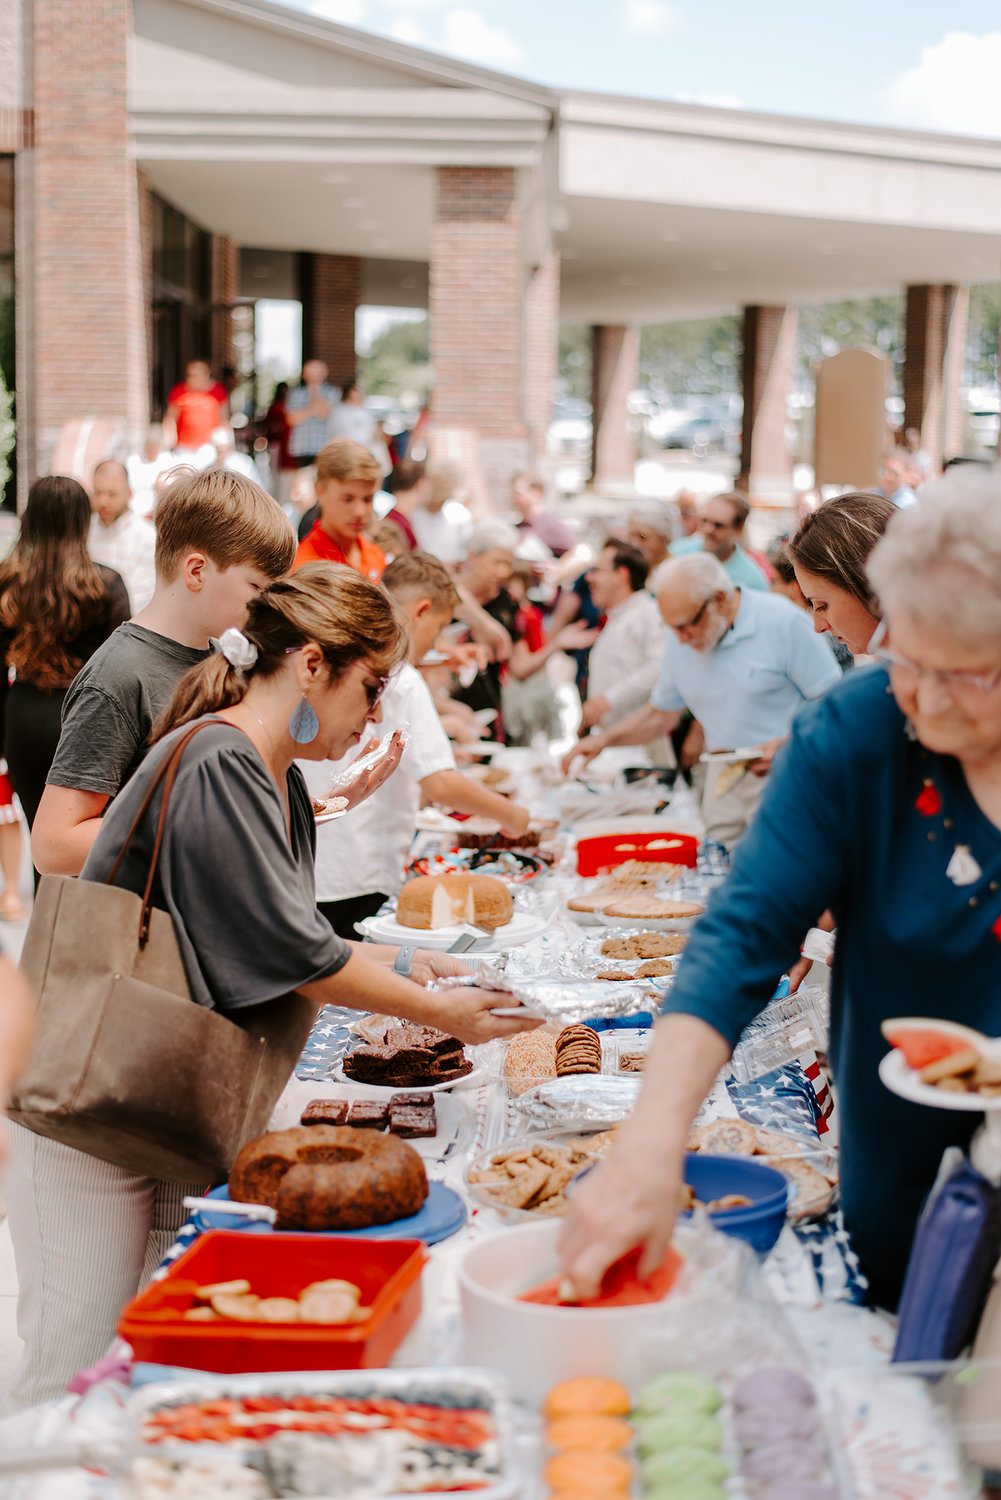 Attendees enjoy a meal during a celebration of Hebron Baptist Church's 180th anniversary Sunday, July 3, 2022, in Dacula, Ga. (Photo/Hebron Baptist Church)